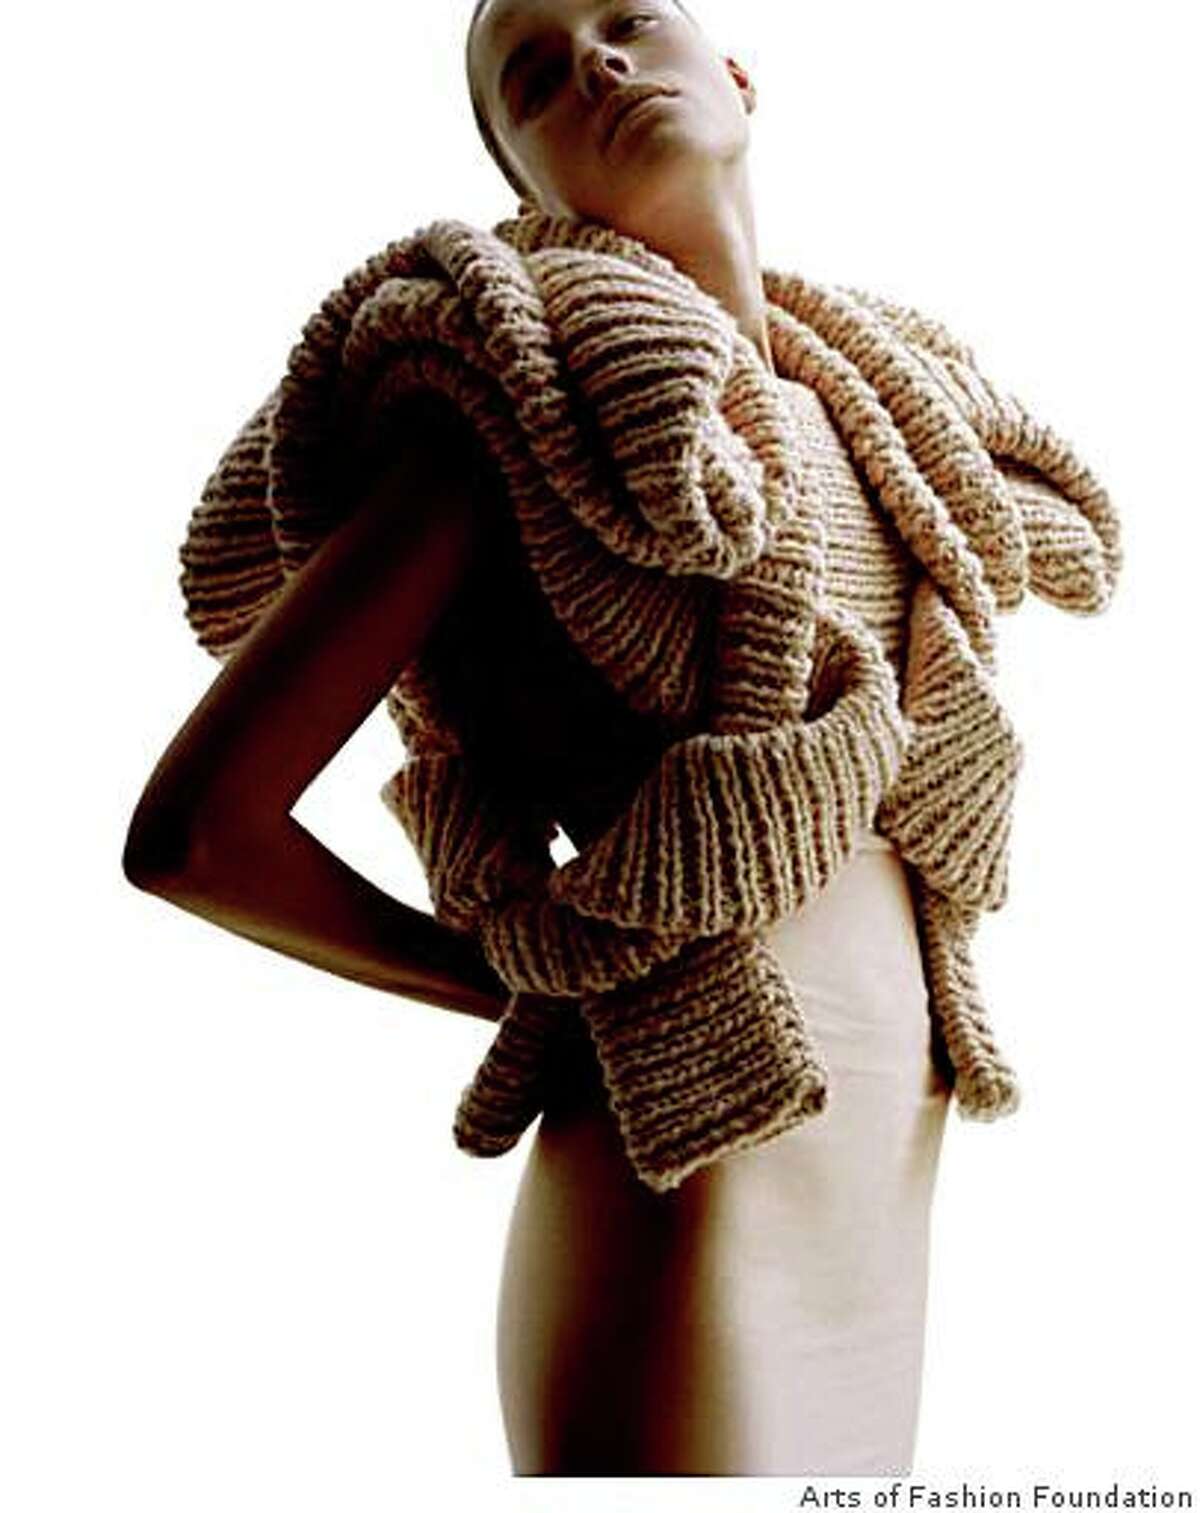 A sculptural knitted sweater by Stockholm knitwear designer Sandra Backlund who will teach a master class at the Oct. 25-29 Arts of Fashion Foundation fashion event in S.F.